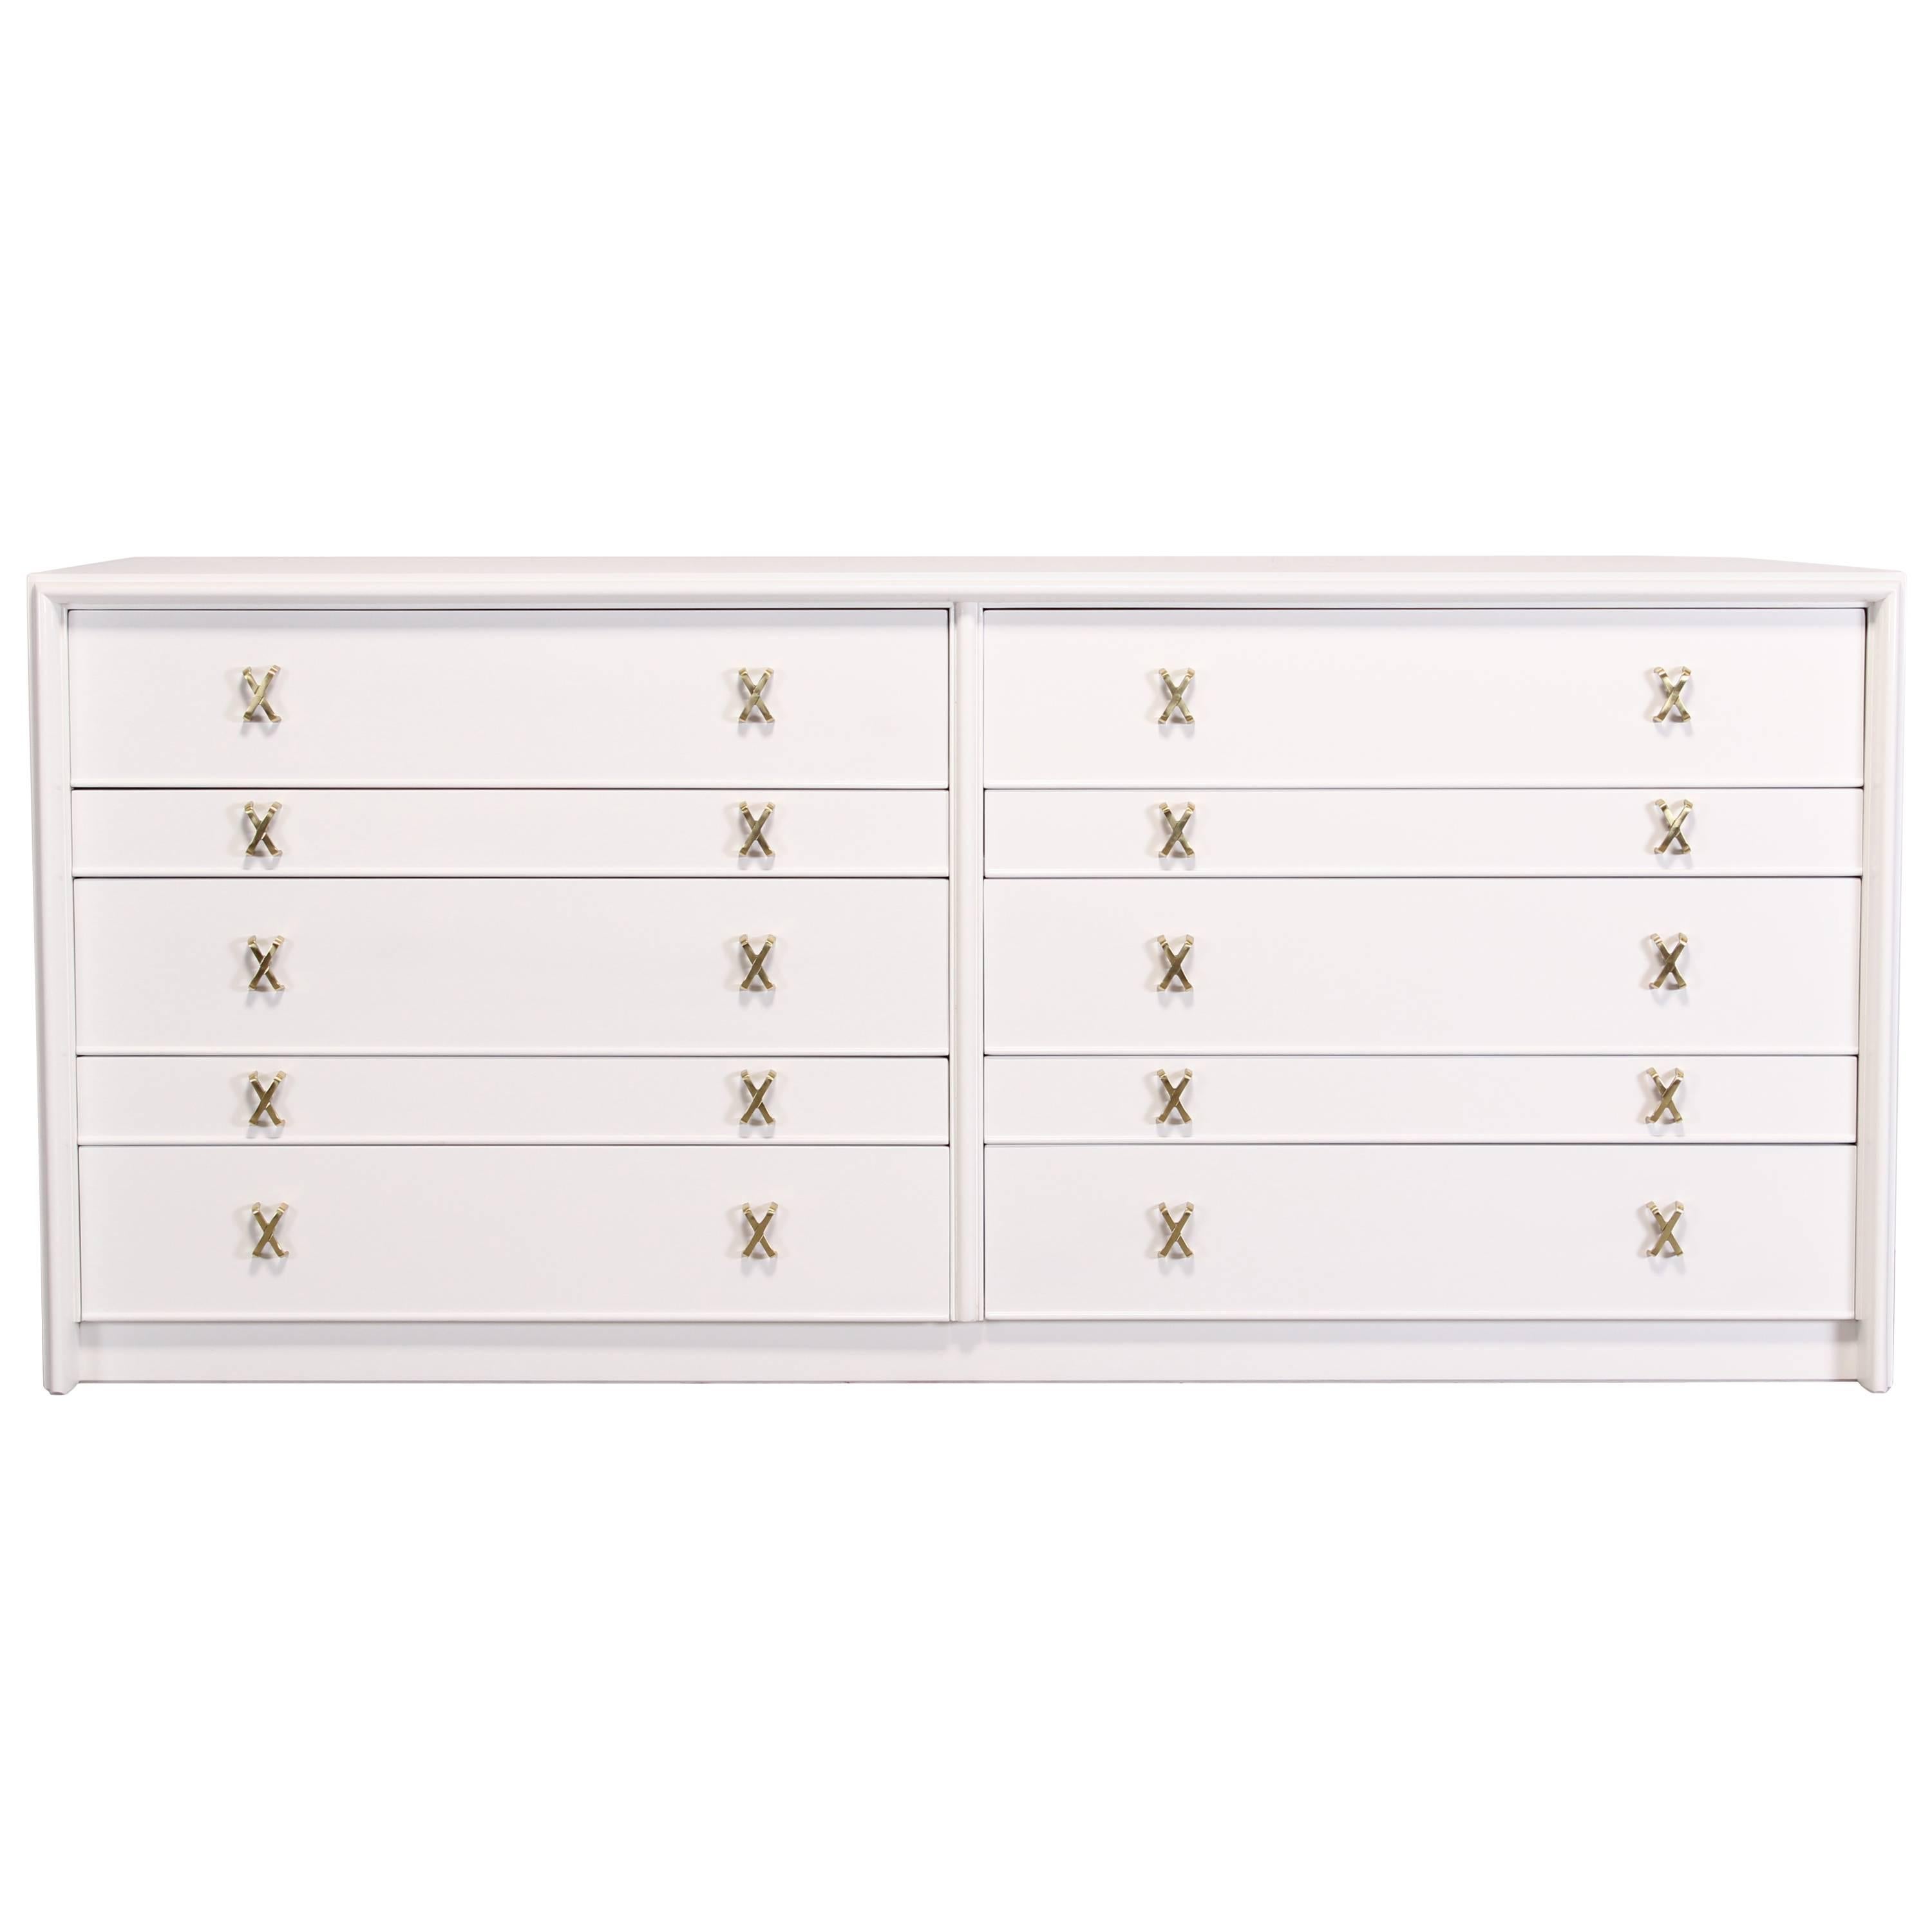 Ten-Drawer Dresser with Brass X Pulls by Paul Frankl for Johnson Furniture Co.